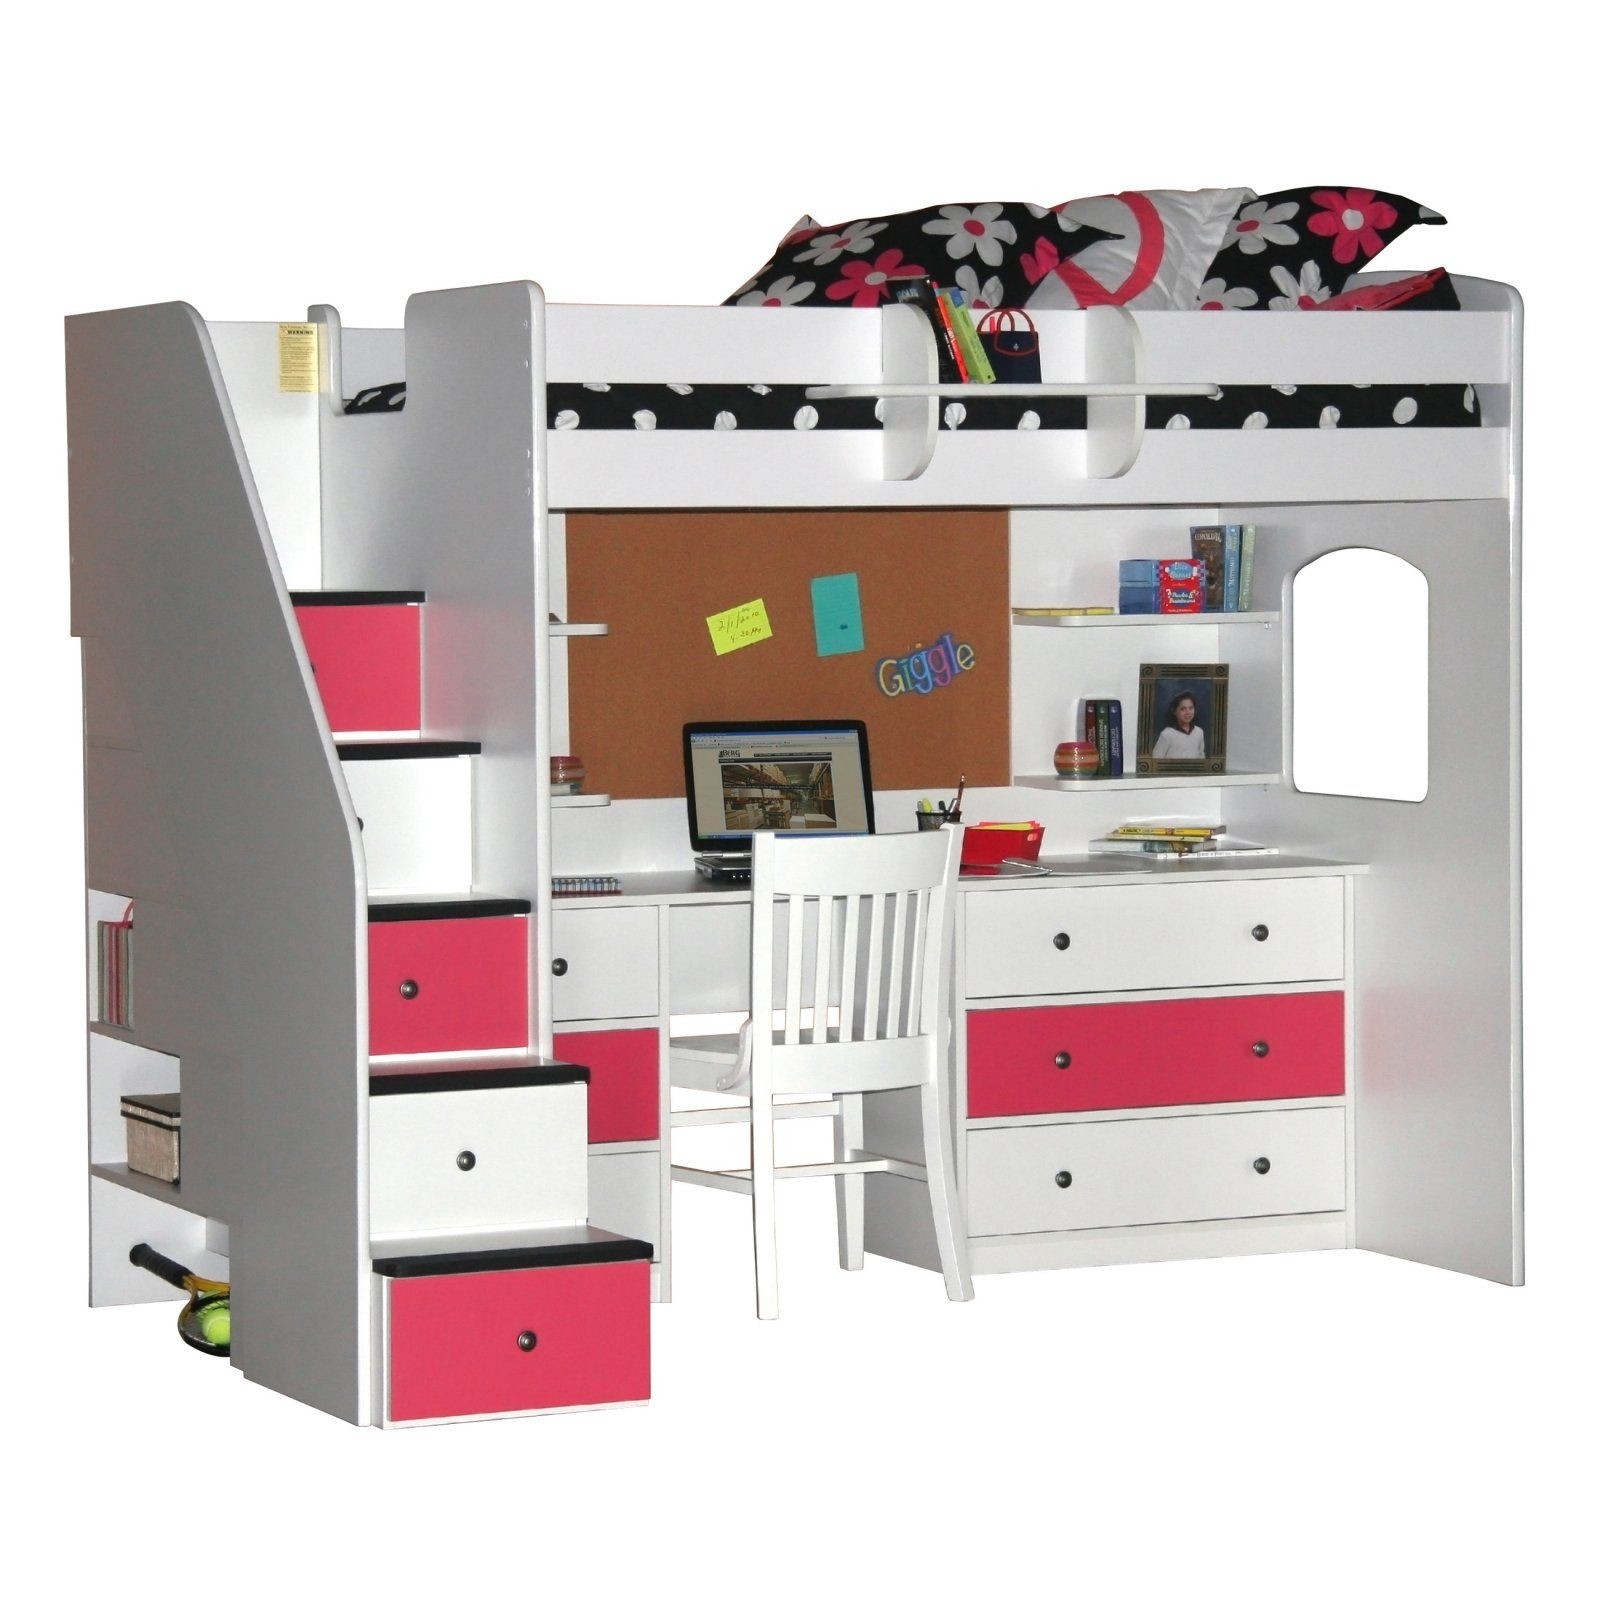 Bunk beds with desk